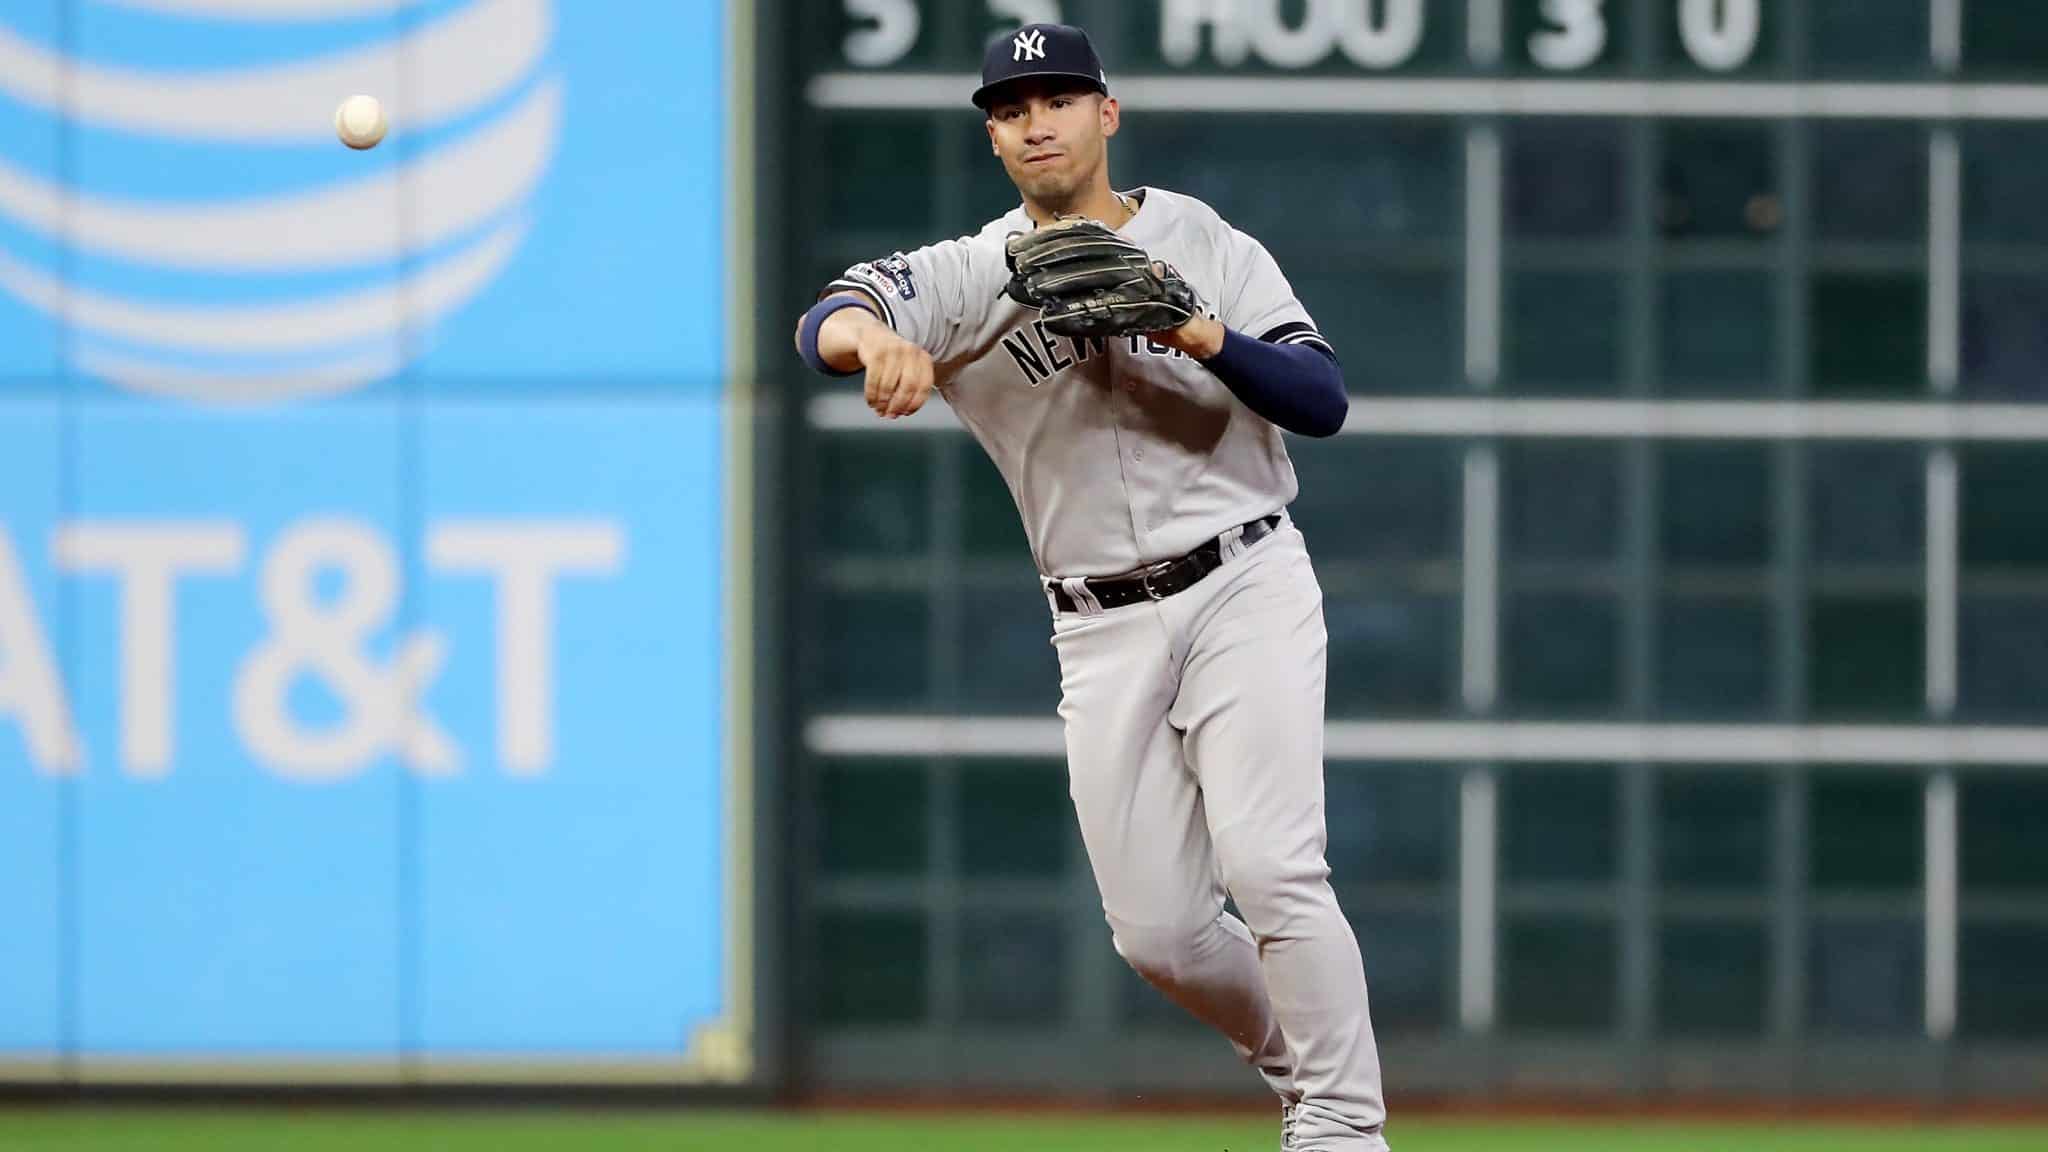 HOUSTON, TEXAS - OCTOBER 19: Gleyber Torres #25 of the New York Yankees throws out the runner against the New York Yankees during the third inning in game six of the American League Championship Series at Minute Maid Park on October 19, 2019 in Houston, Texas.